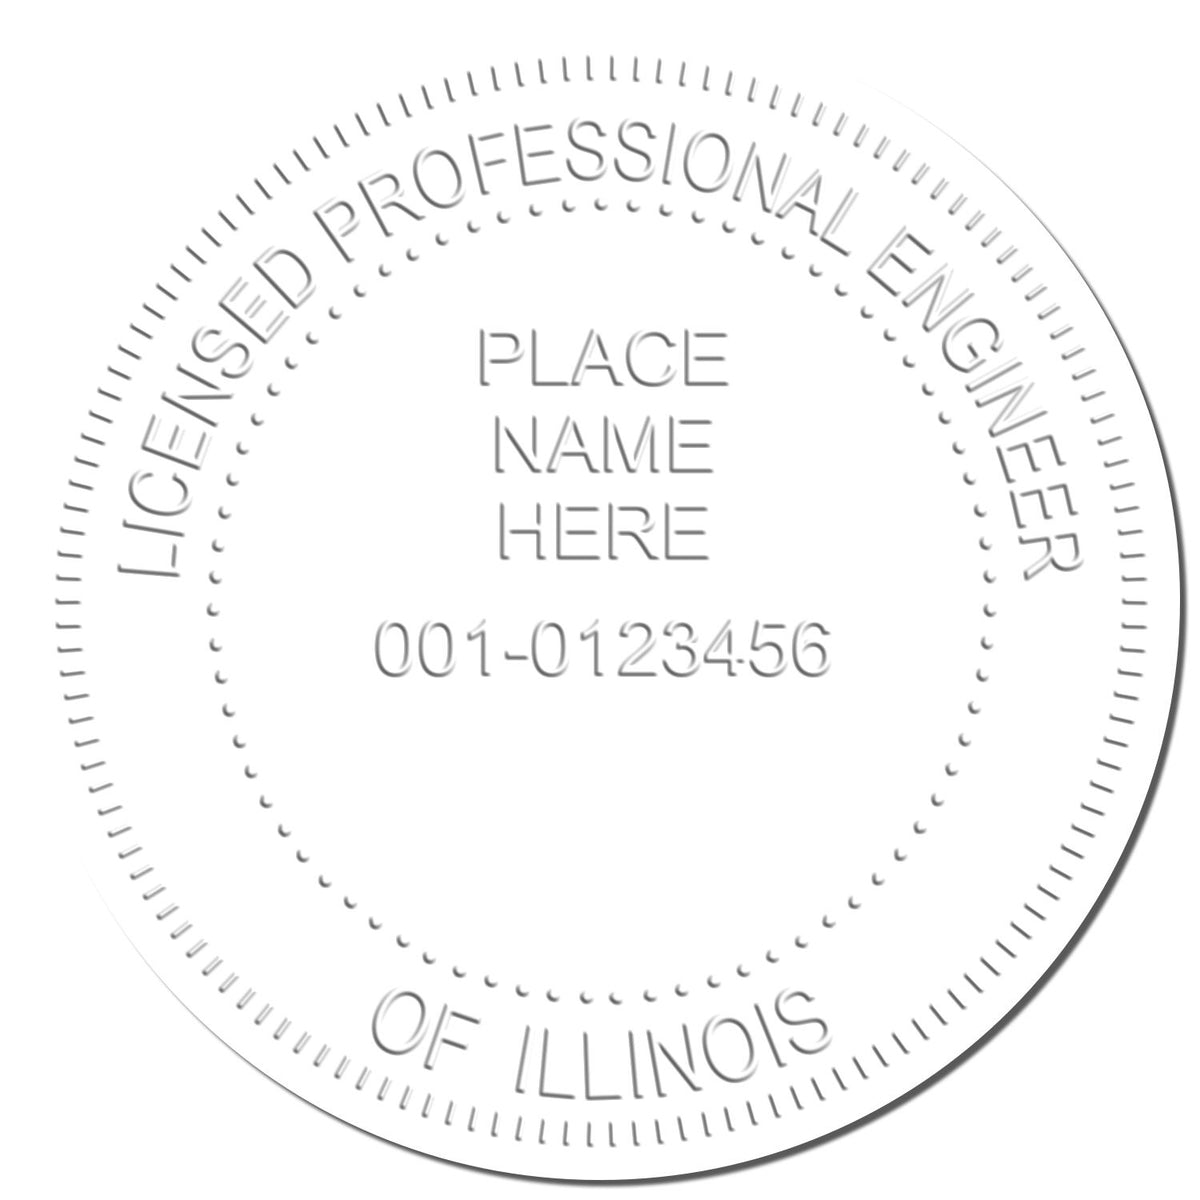 This paper is stamped with a sample imprint of the Heavy Duty Cast Iron Illinois Engineer Seal Embosser, signifying its quality and reliability.